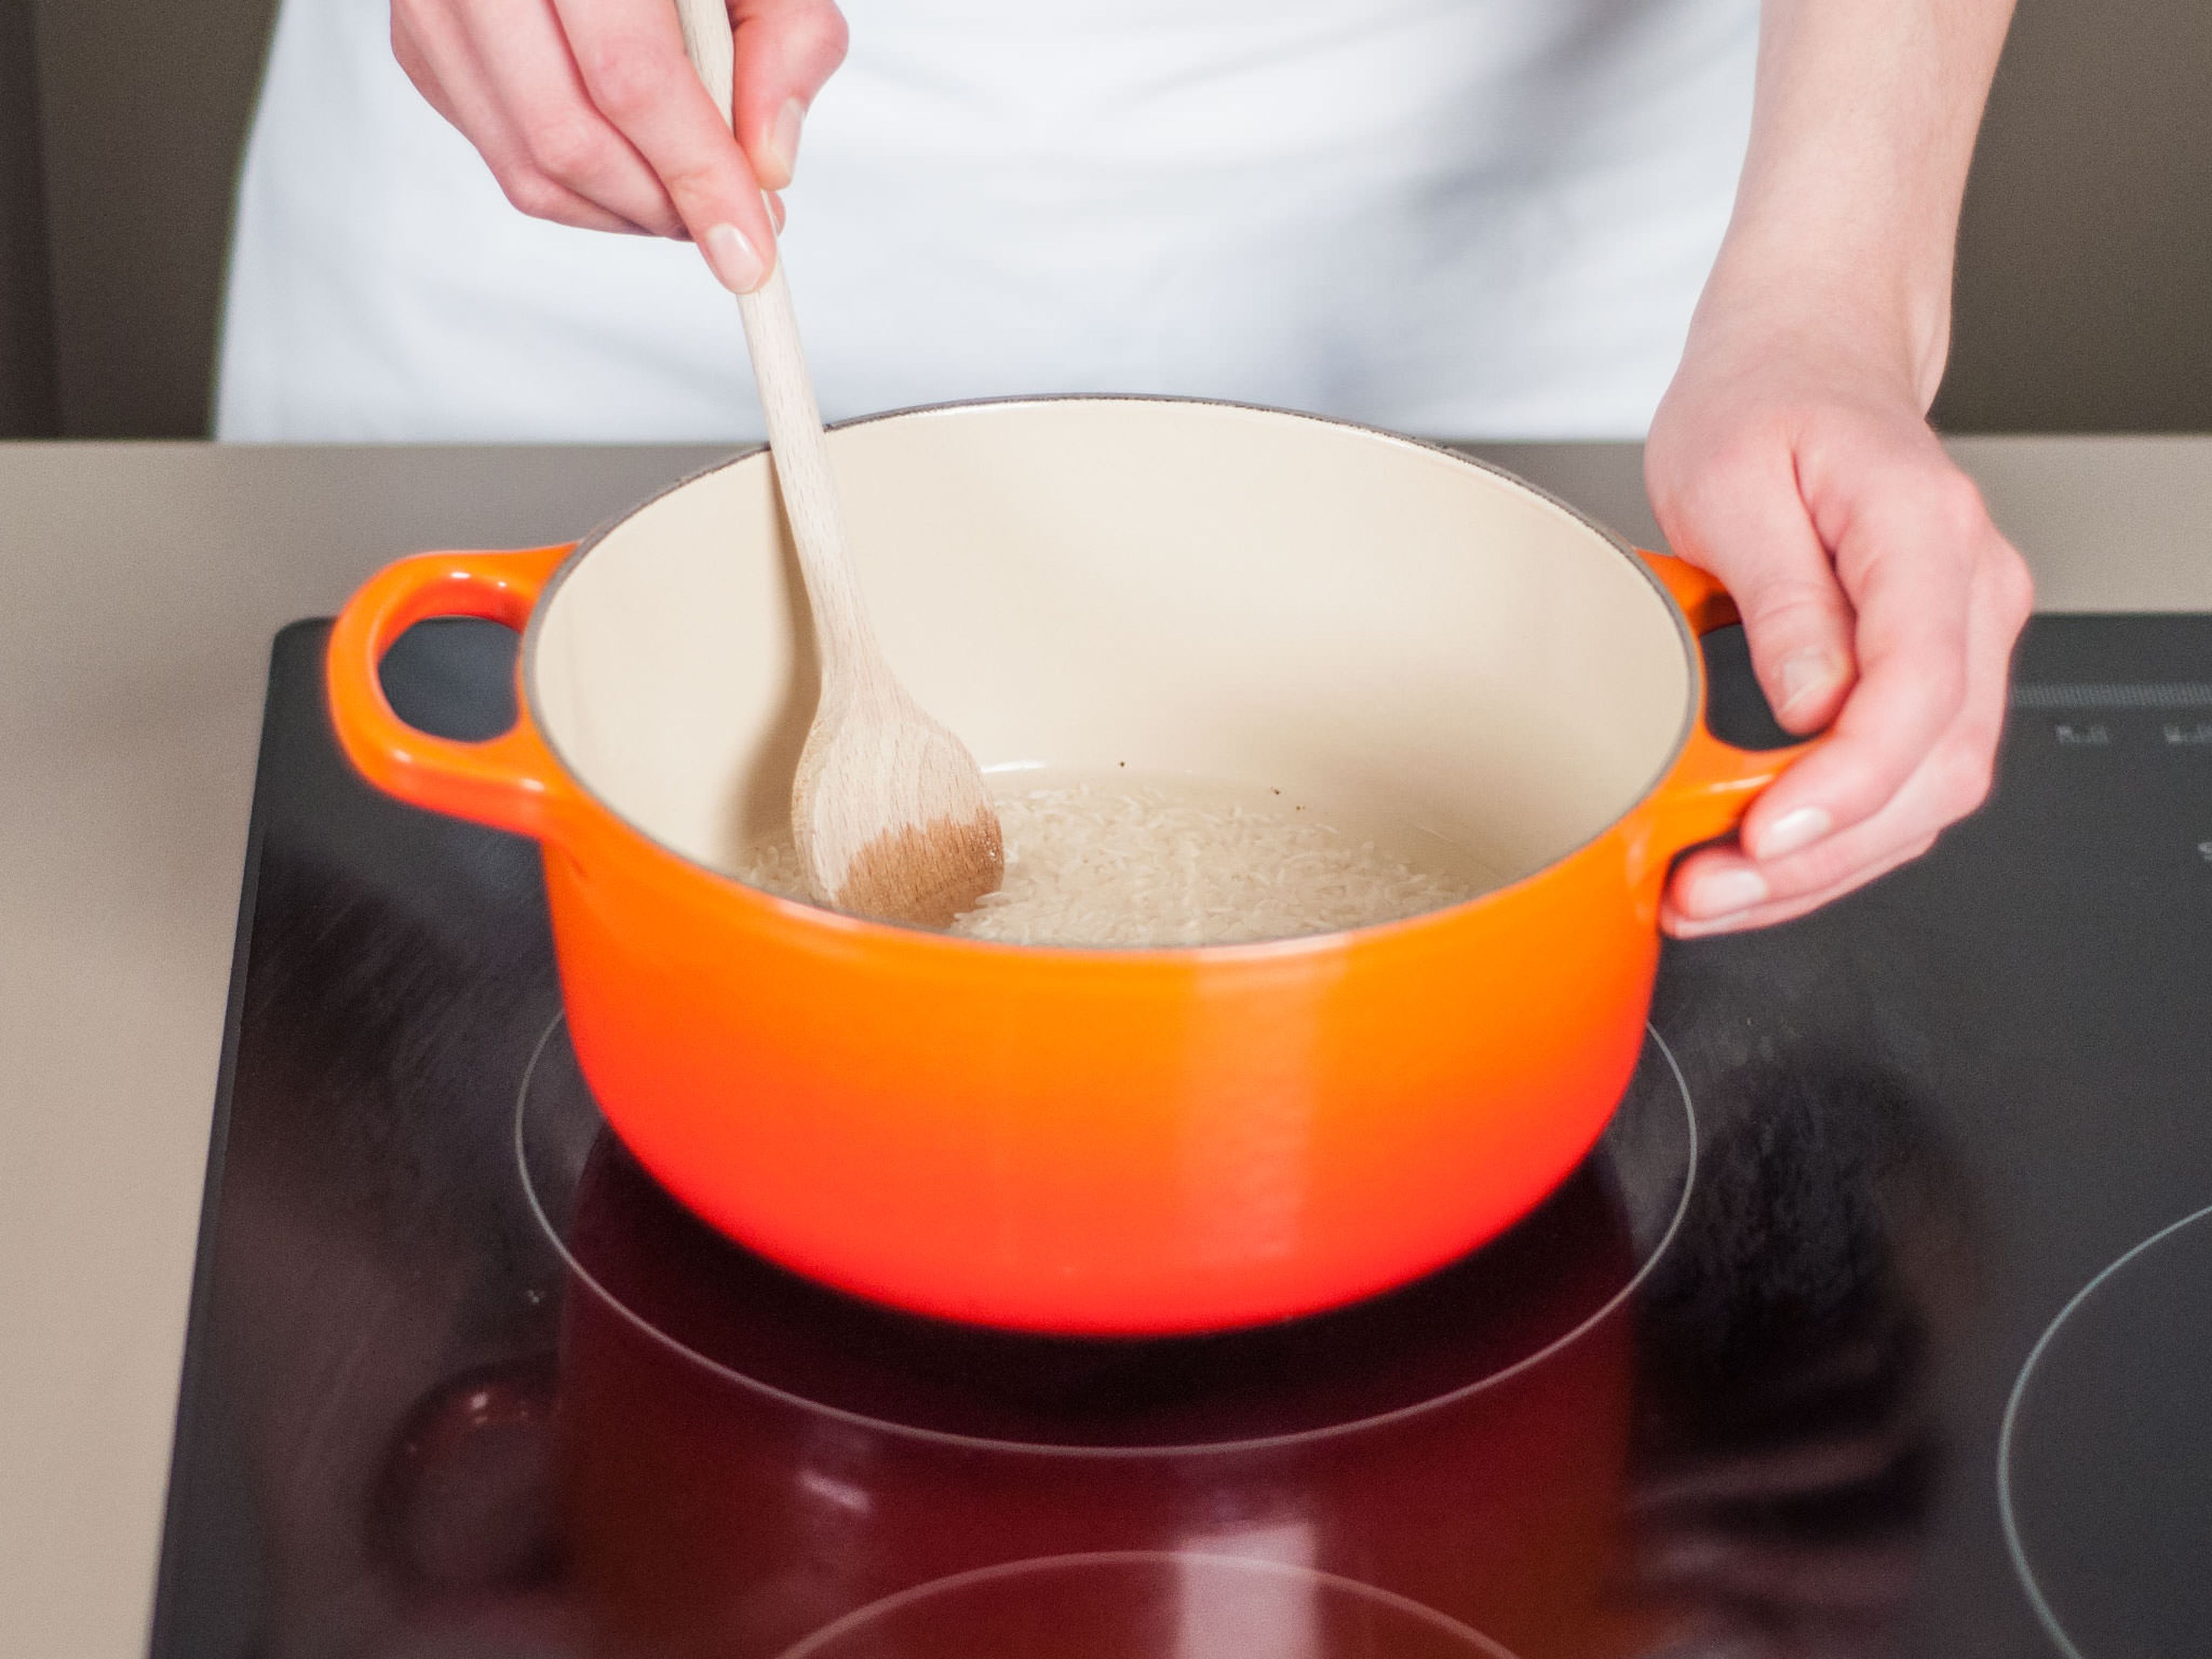 In a saucepan, bring rice, and water to a boil. Reduce heat to low and cook for approx. 12 - 15 min.